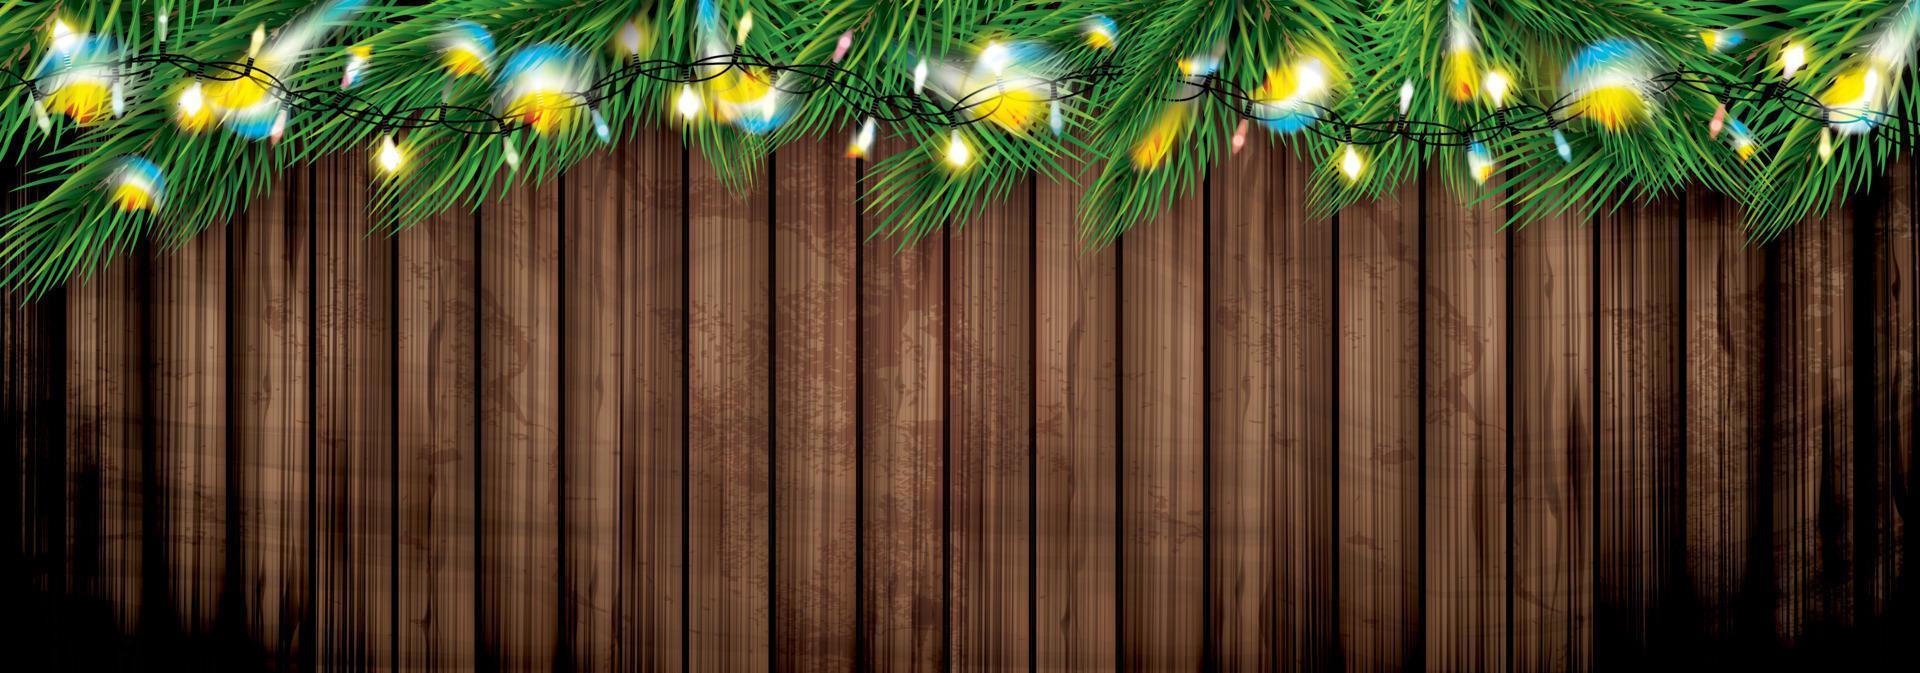 Fir Branches with Neon Lights. Christmas Decoration with Colorful Twinkles. vector